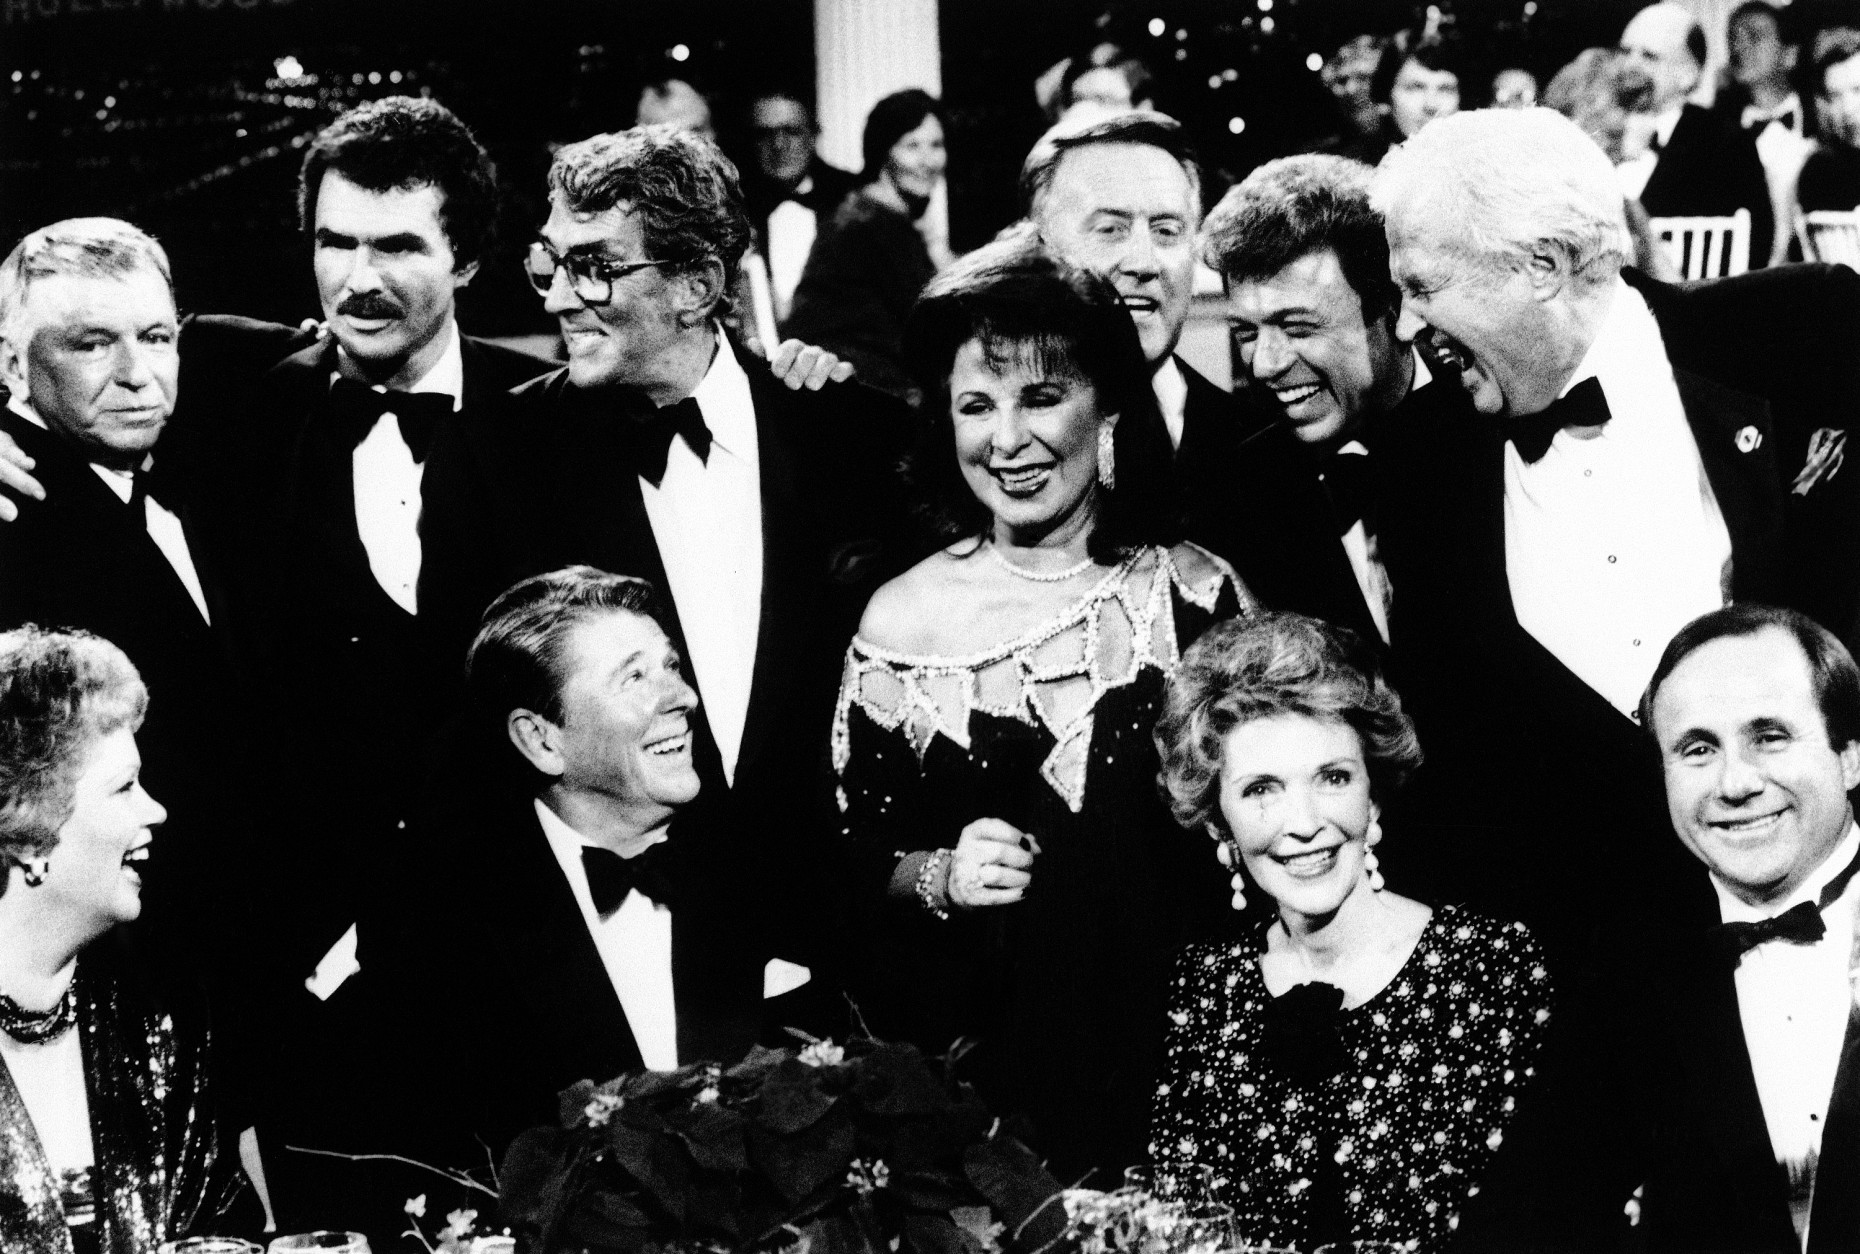 President Ronald Reagan and first lady Nancy Reagan are surrounded by Hollywood friends, Dec. 1, 1985 in Burbank, Calif., after the taping of a CBS-TV special honoring the president titled "All-Star Party For Dutch Reagan". Seated, from left: Maureen Reagan, the president, Mrs. Reagan and Michael Reagan. Standing, from left: Frank Sinatra, Burt Reynolds, Dean Martin, Eydie Gorme, Vin Scully, Steve Lawrence, and Paul Keys. (AP Photo/Scott Stewart)